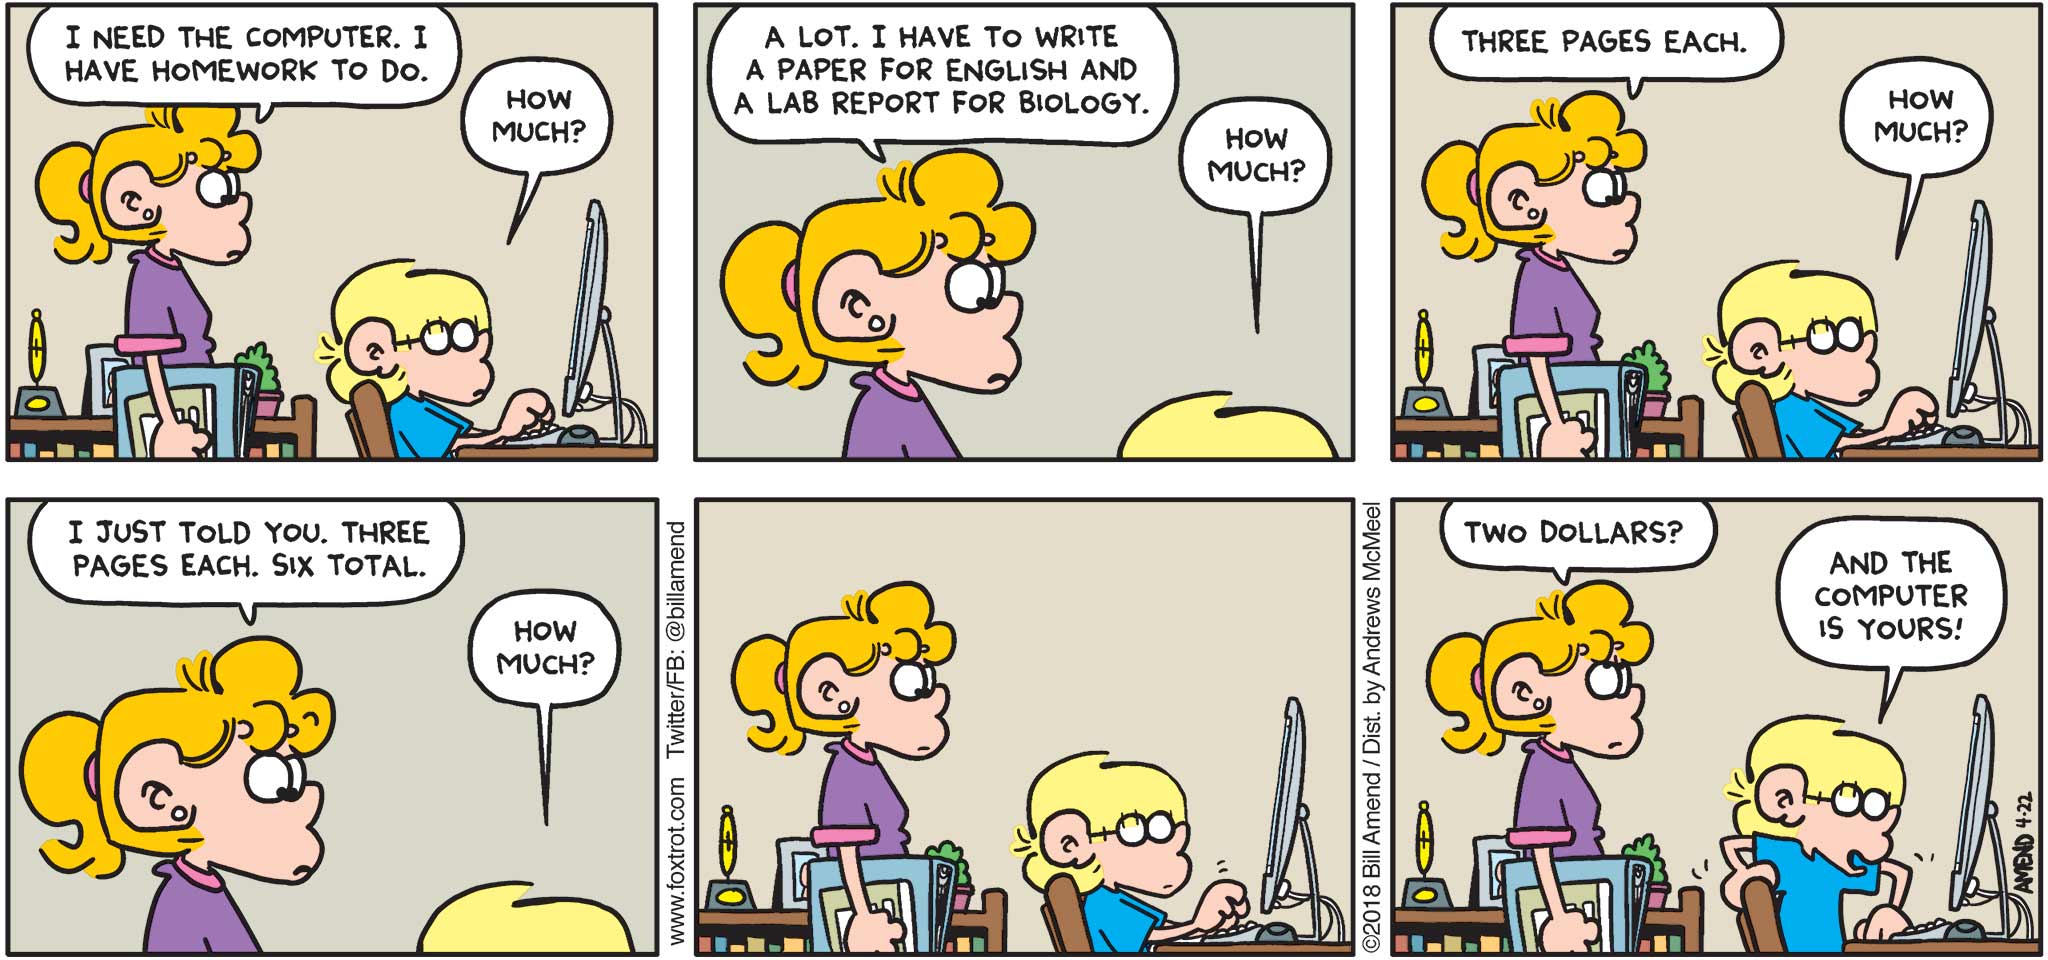 FoxTrot by Bill Amend - "How Much?" published April 22, 2018 - Paige says: I need to use the computer. I have homework to do. Jason says: How much? Paige says: A lot. I have to write a paper for English and a lab report for Biology. Jason says: How much? Paige says: Three pages each. Jason says: How much? Paige says: I just told you. Three pages each. Six total. Jason says: How much? Paige says: Two dollars? Jason says: And the computer is yours!